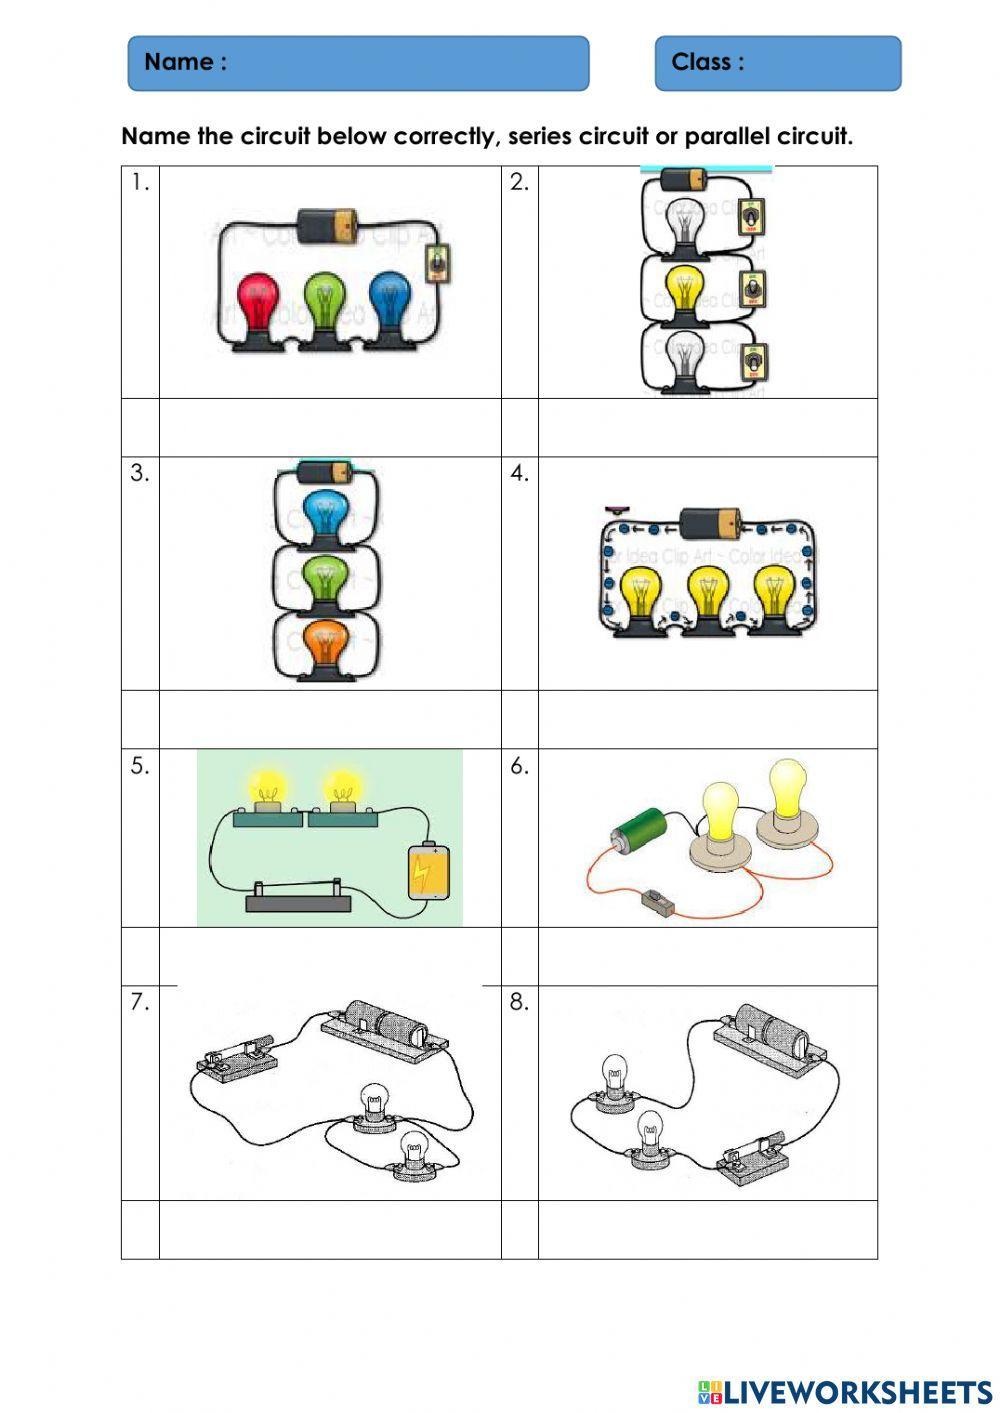 Eletricity - series and parallel circuit